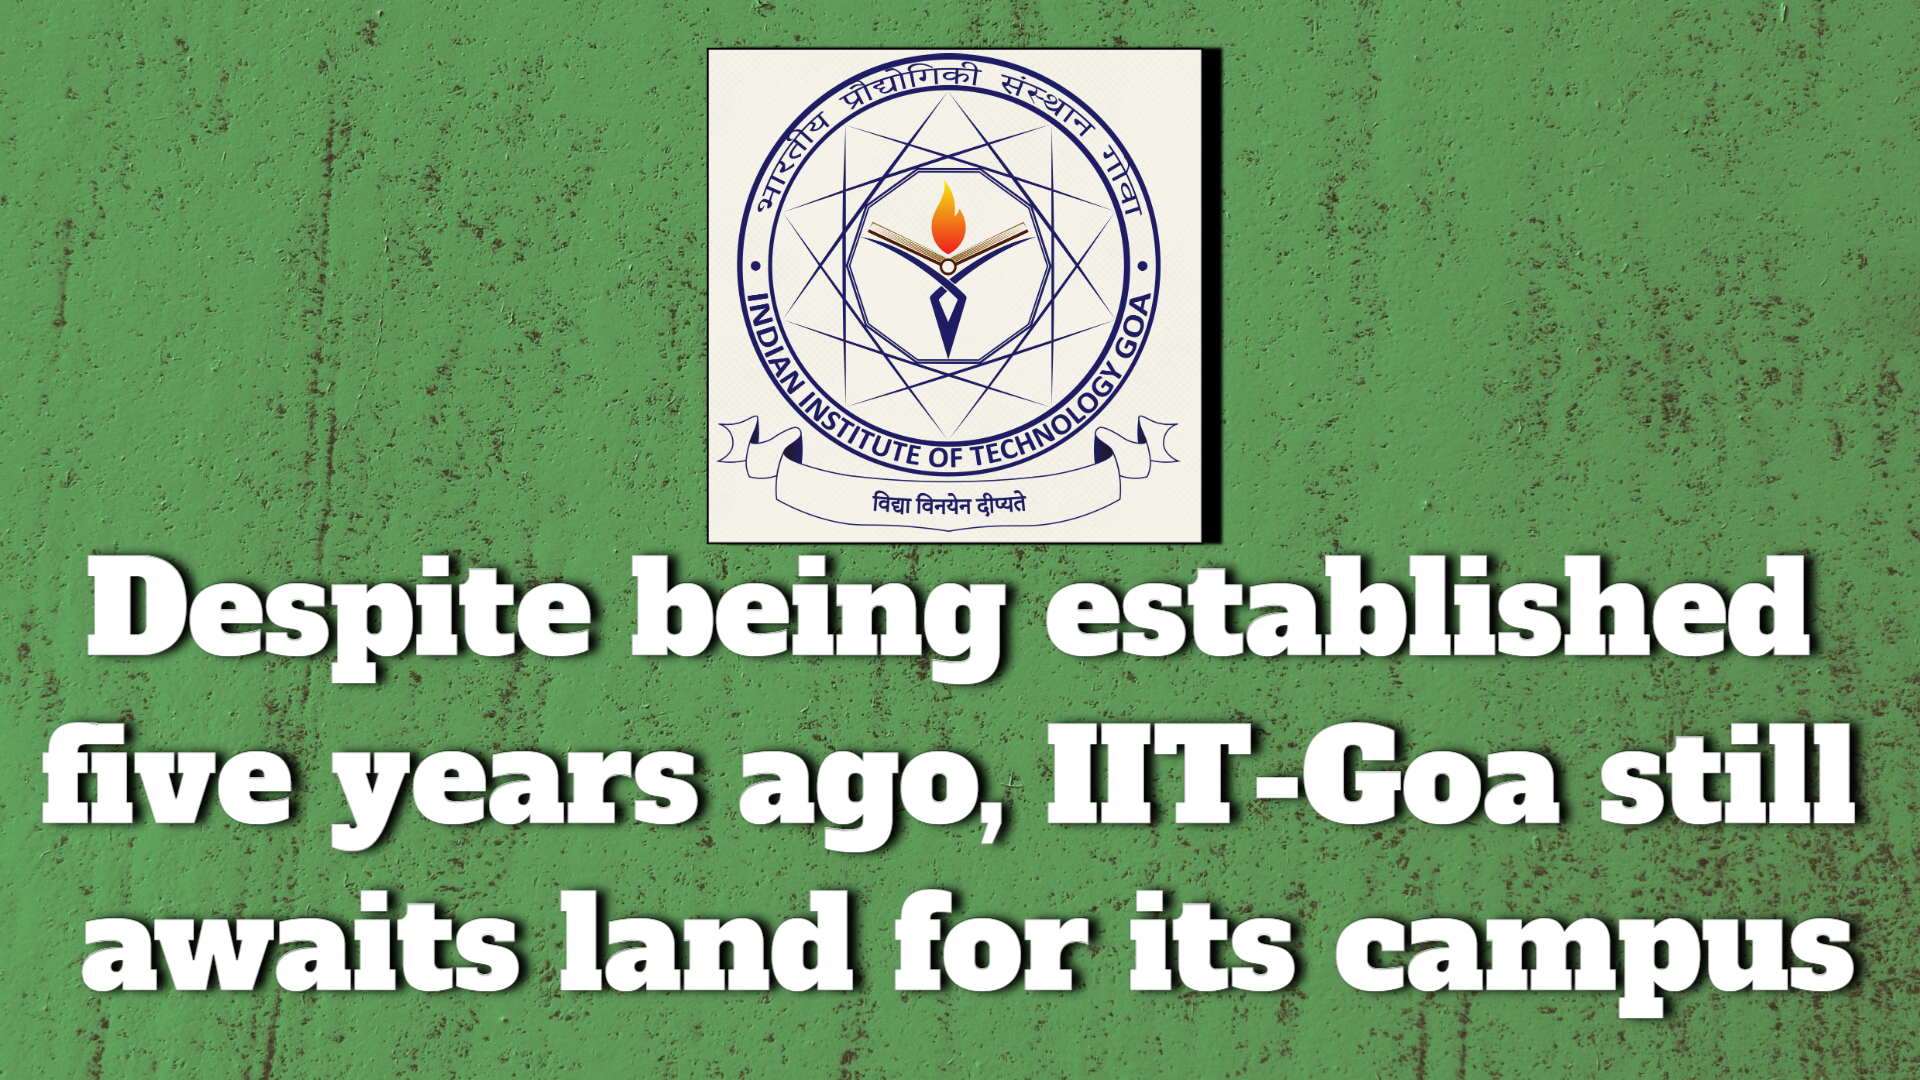 Five years after its inception, IIT-Goa still awaits the allotment of campus land